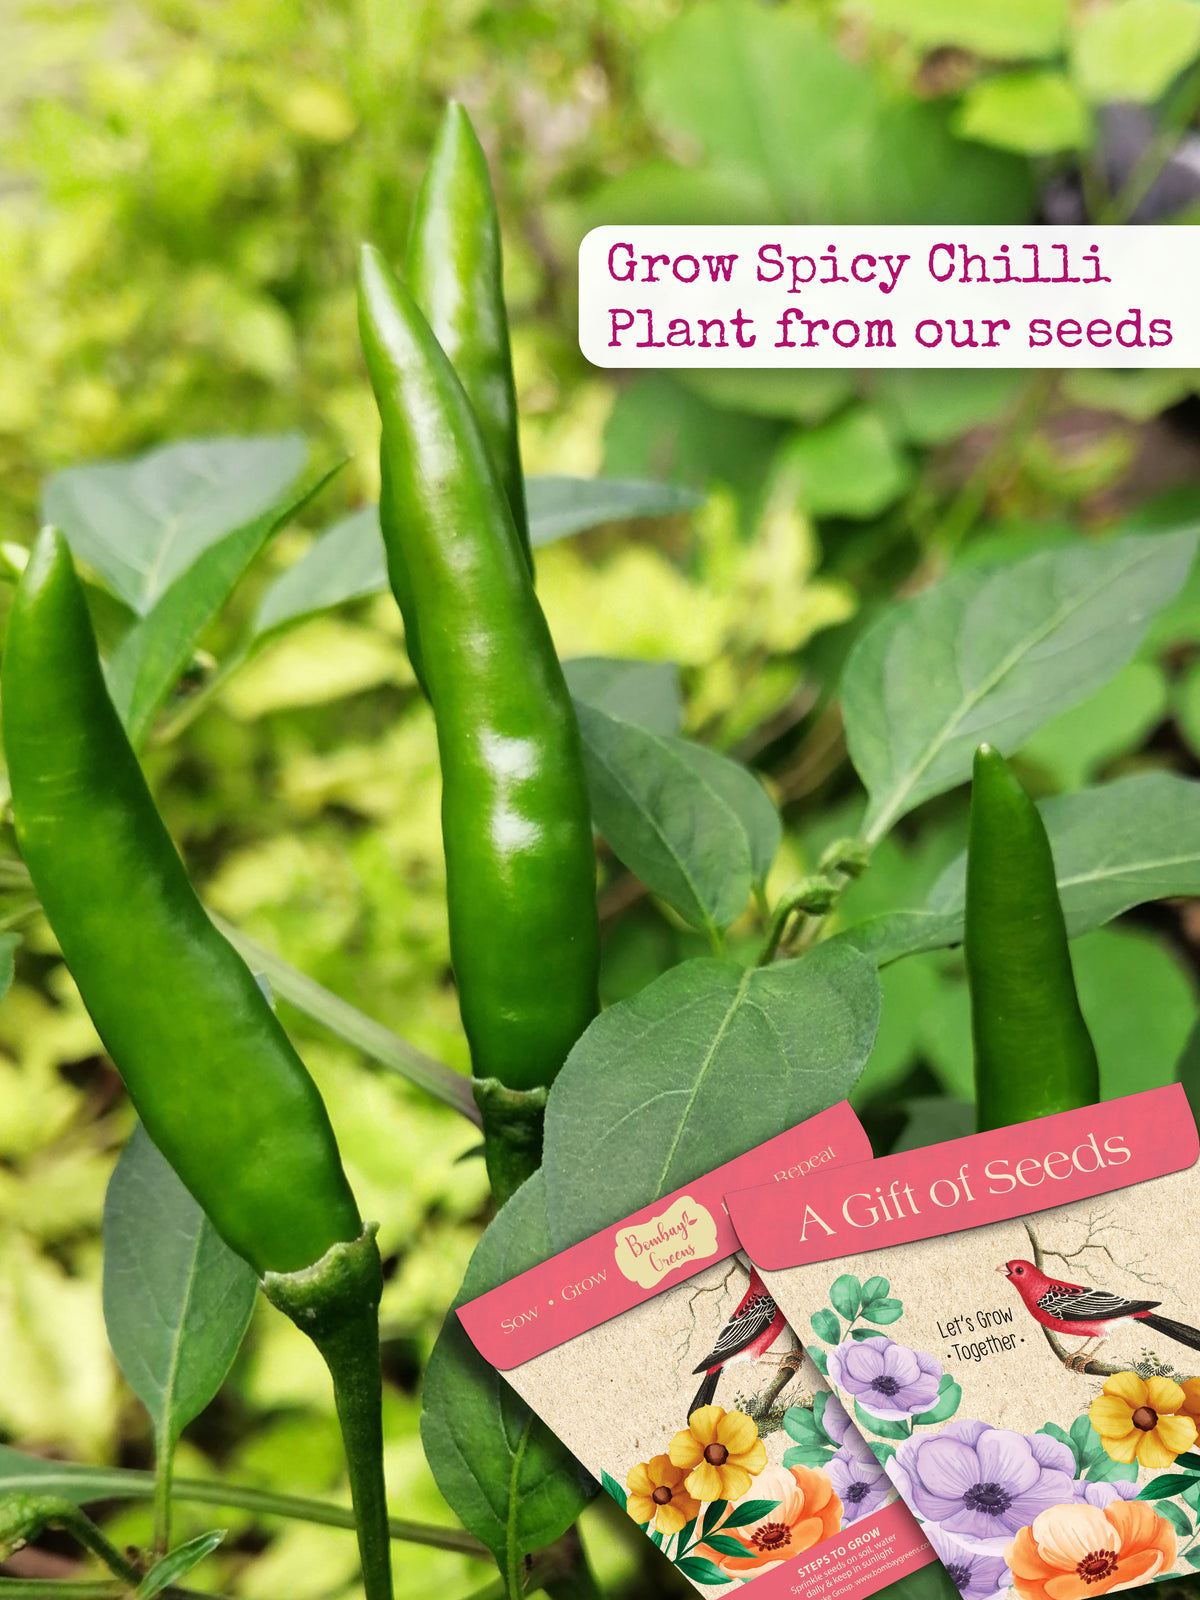 Spicy Chilli Seeds